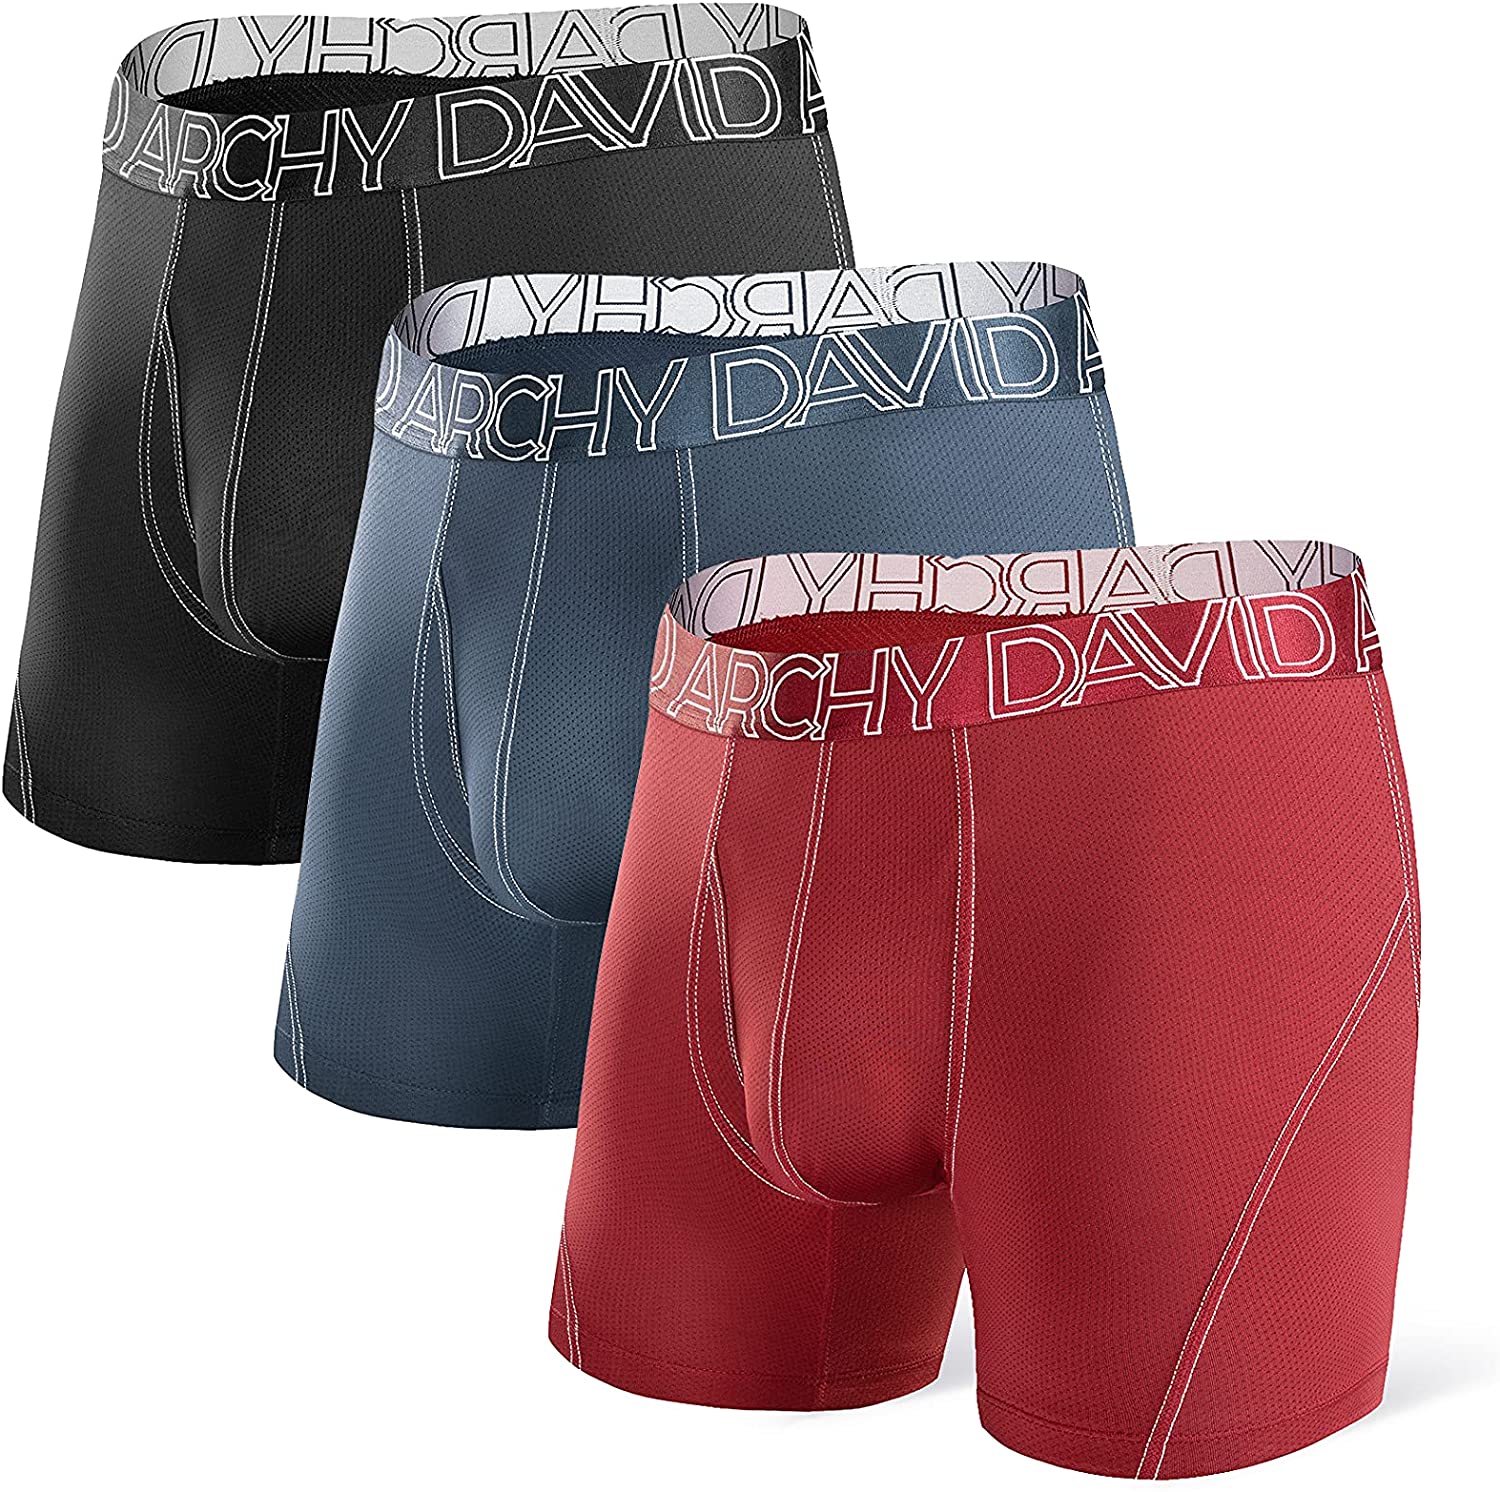 3 Packs Boxer Briefs Quick Dry Sports David Archy Men's Ultra Soft